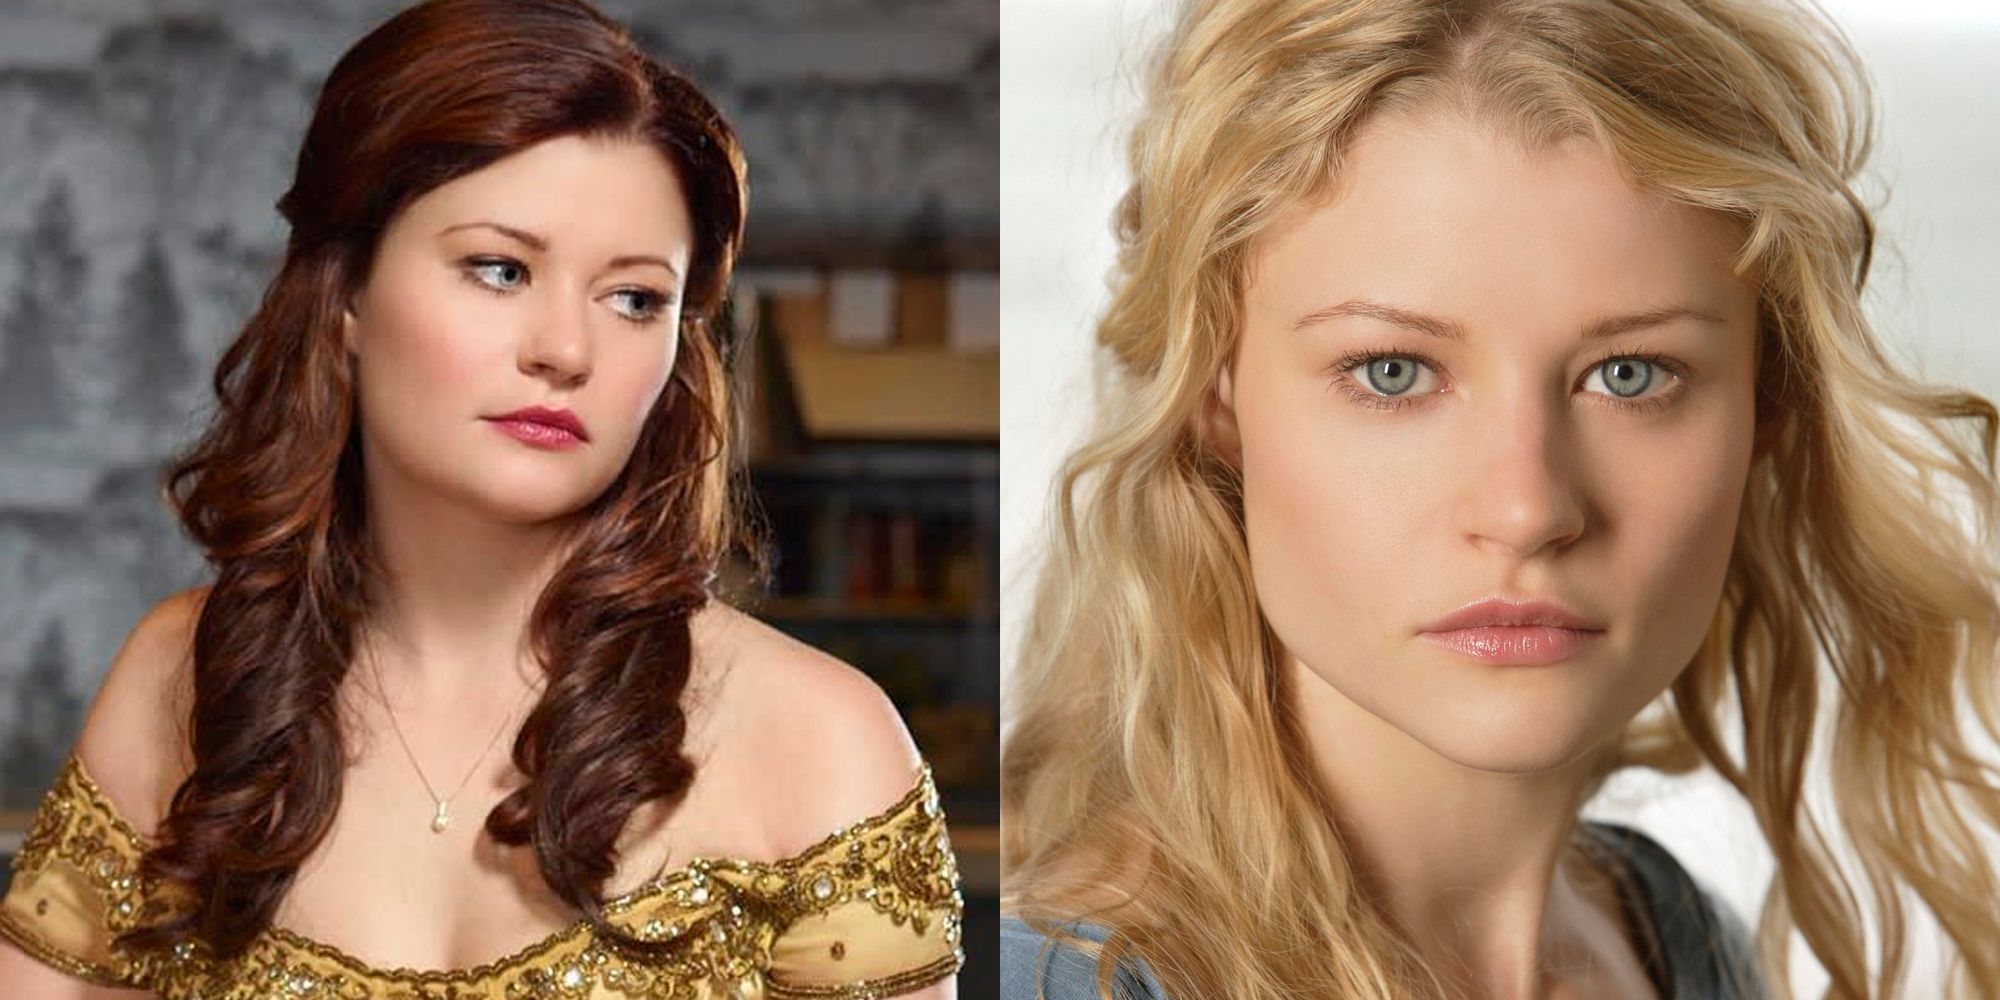 Emilie de Ravin plays Belle and Claire in Once Upon a Time and Lost